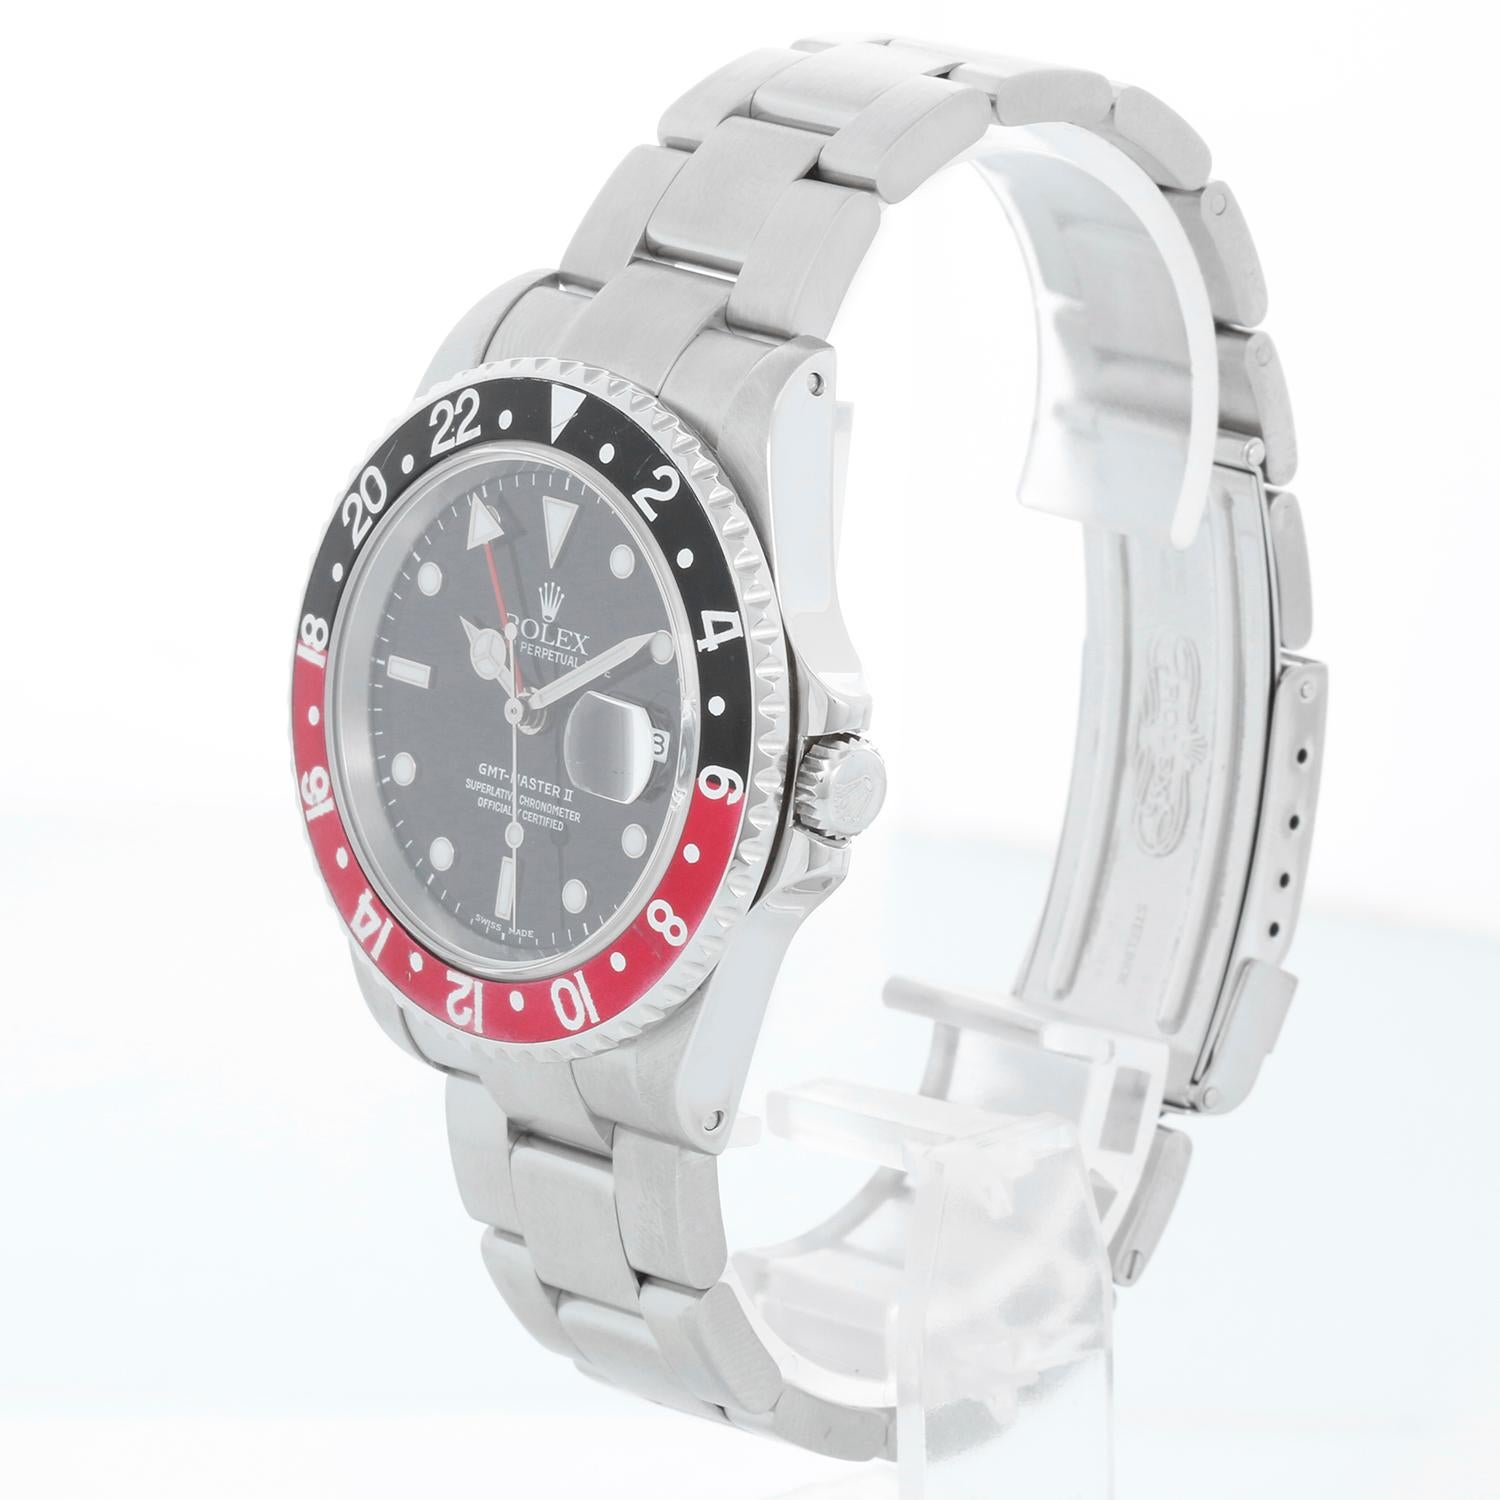 Rolex GMT-Master II Stainless Steel Men's Watch 16710 Black Dial & Bezel -  Automatic winding, 31 jewels, Quickset, sapphire crystal. Stainless steel case; rotating bezel with black and red bezel (40mm diameter). Black dial with luminous style